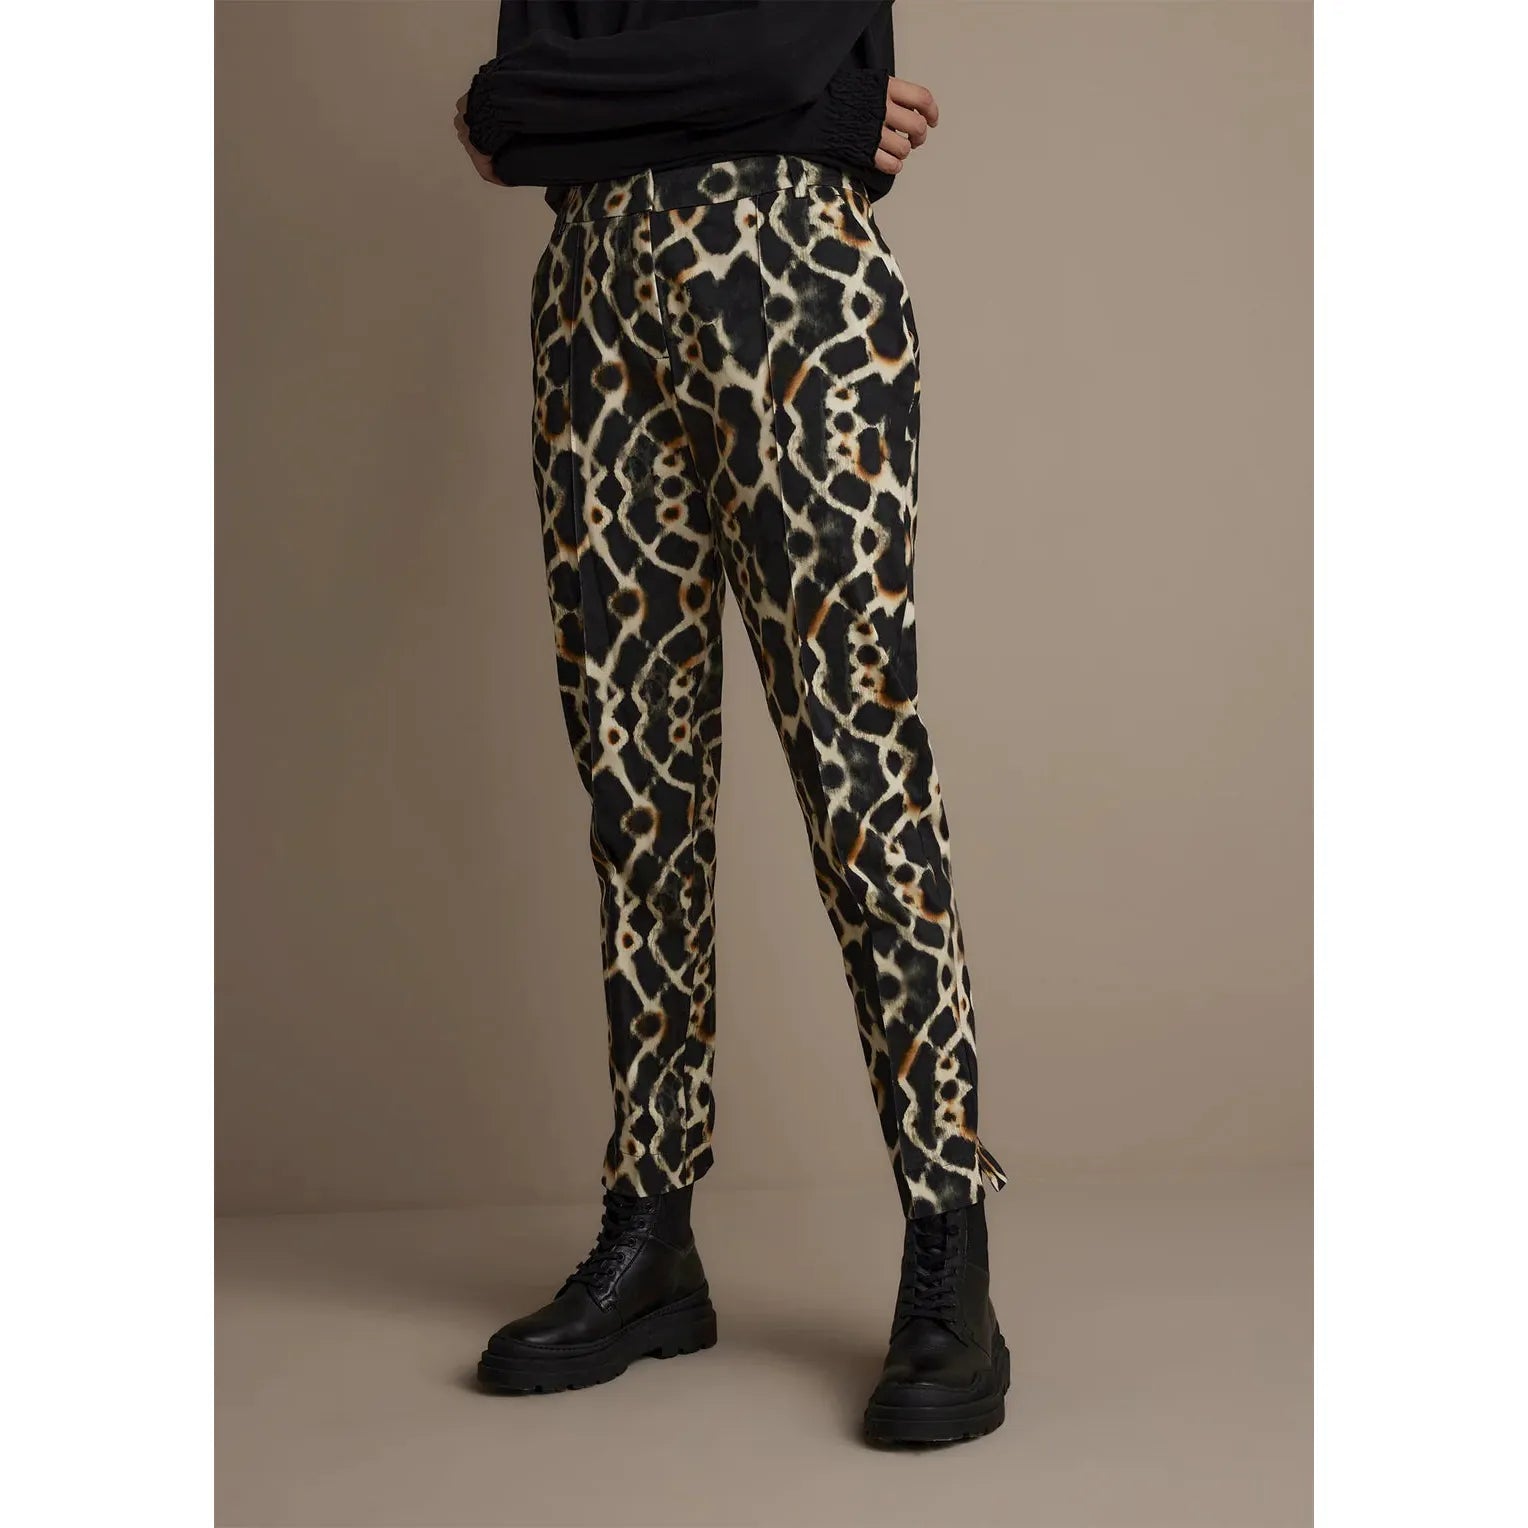 Figure-hugging trousers with small slits along the bottoms of the legs. The trousers are from a soft, stretchy cotton fabric and feature a tie-dye print. The jeans have slit pockets at the front and flap pockets at the back.